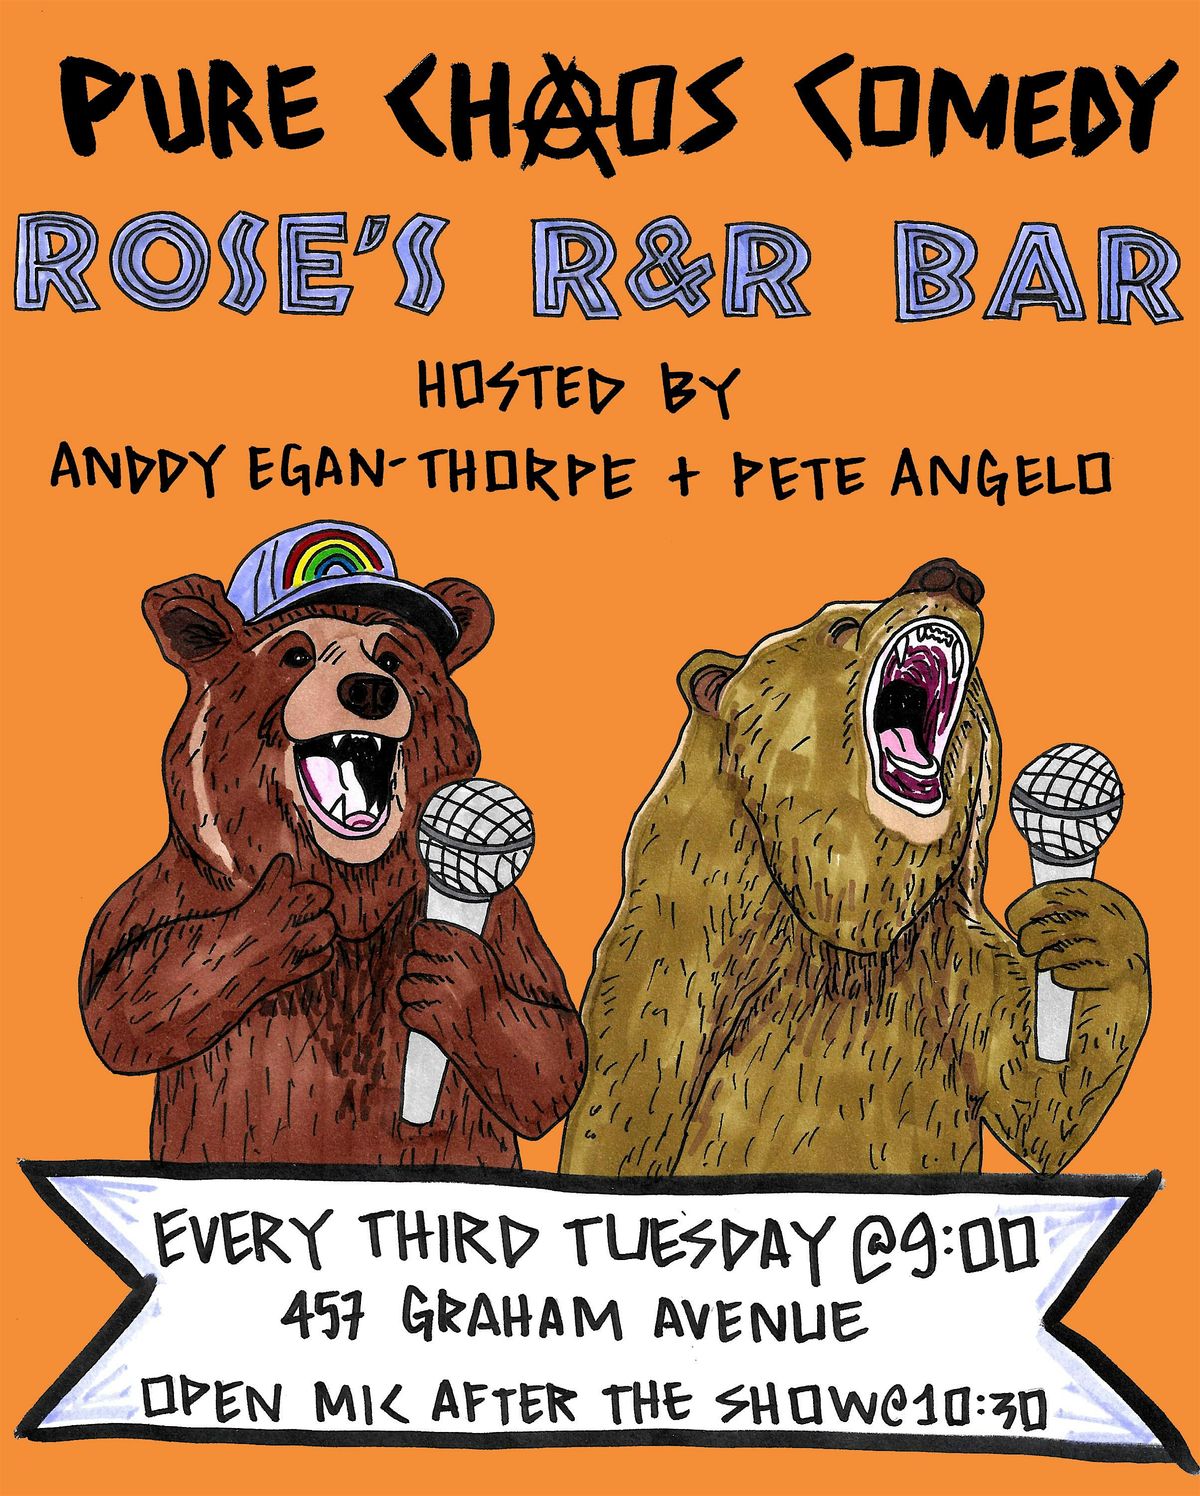 Pure Chaos Comedy at Rose's R&R Bar - FREE!